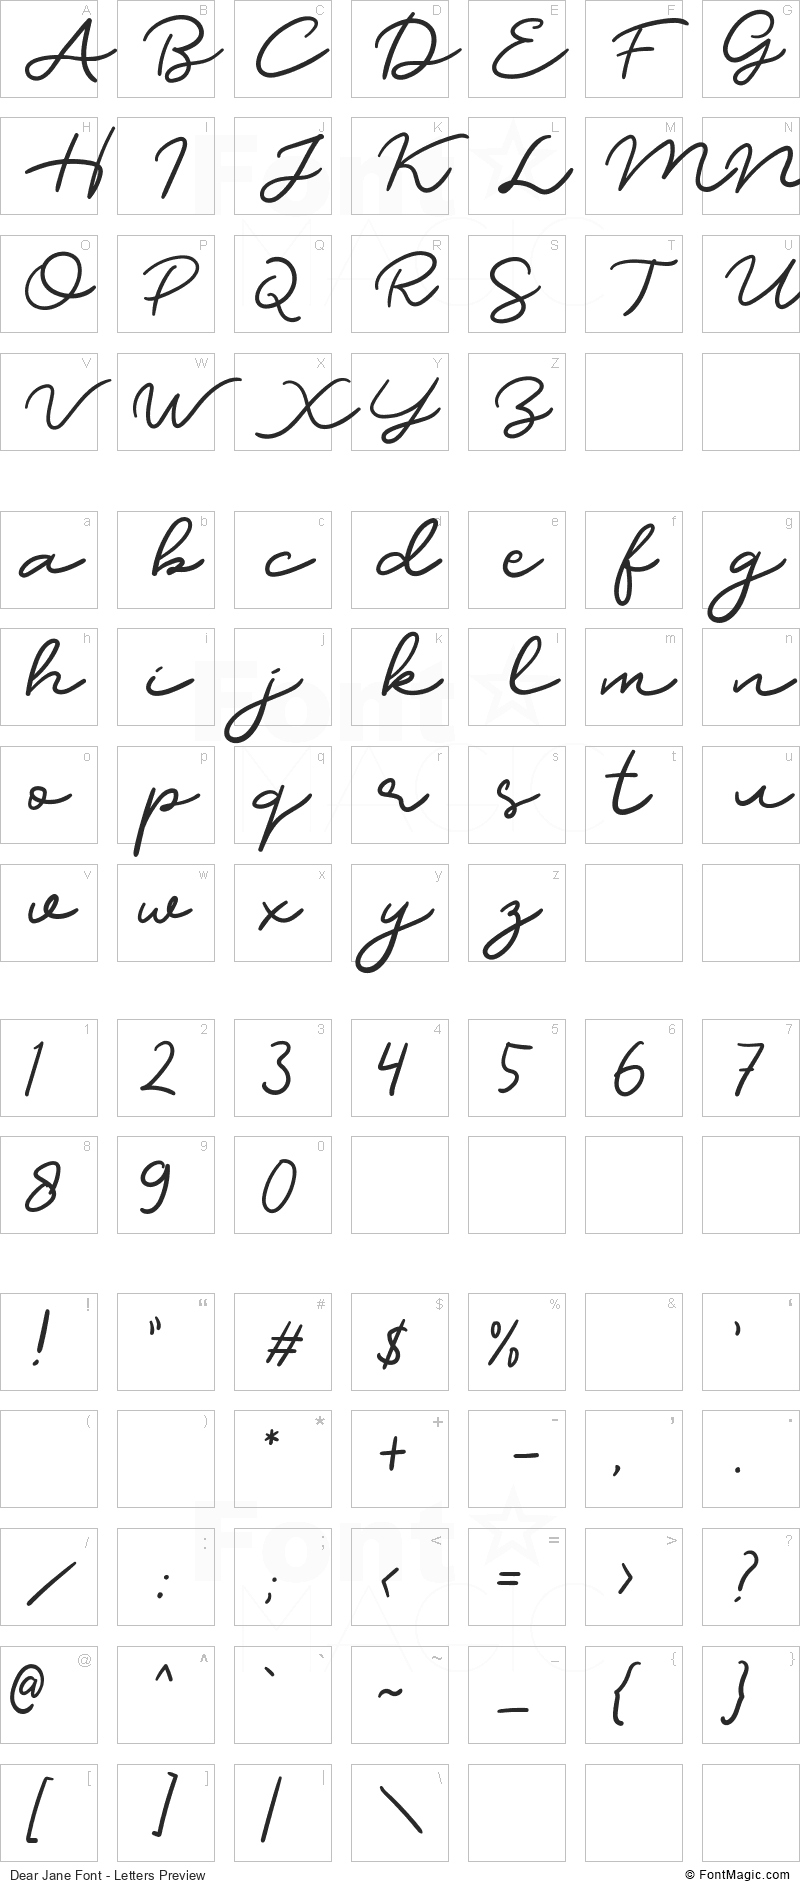 Dear Jane Font - All Latters Preview Chart